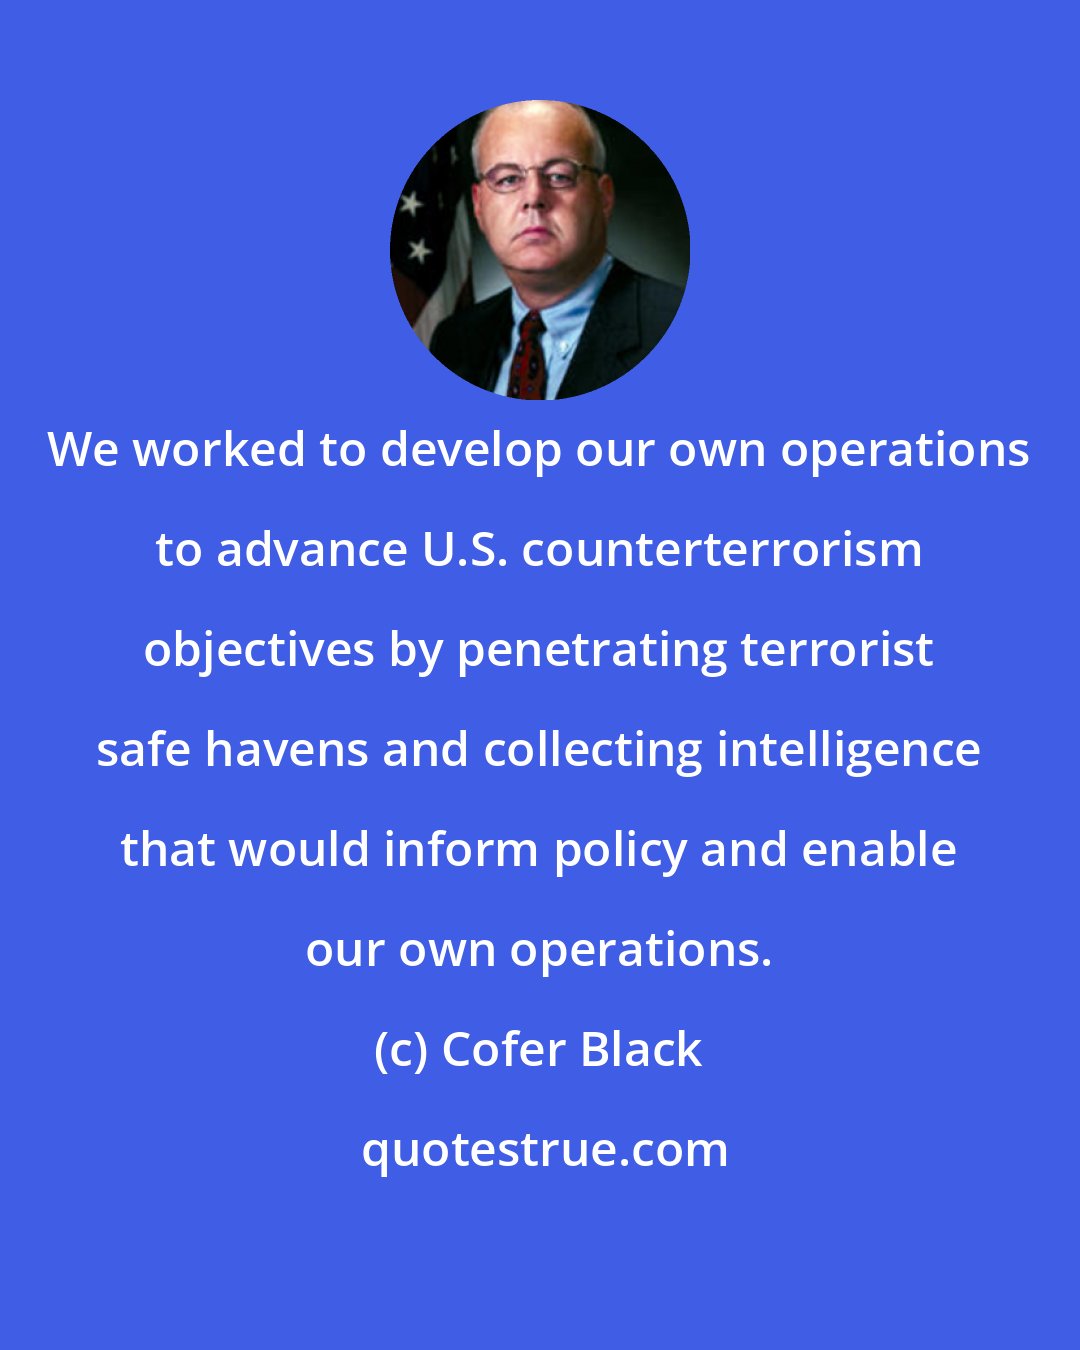 Cofer Black: We worked to develop our own operations to advance U.S. counterterrorism objectives by penetrating terrorist safe havens and collecting intelligence that would inform policy and enable our own operations.